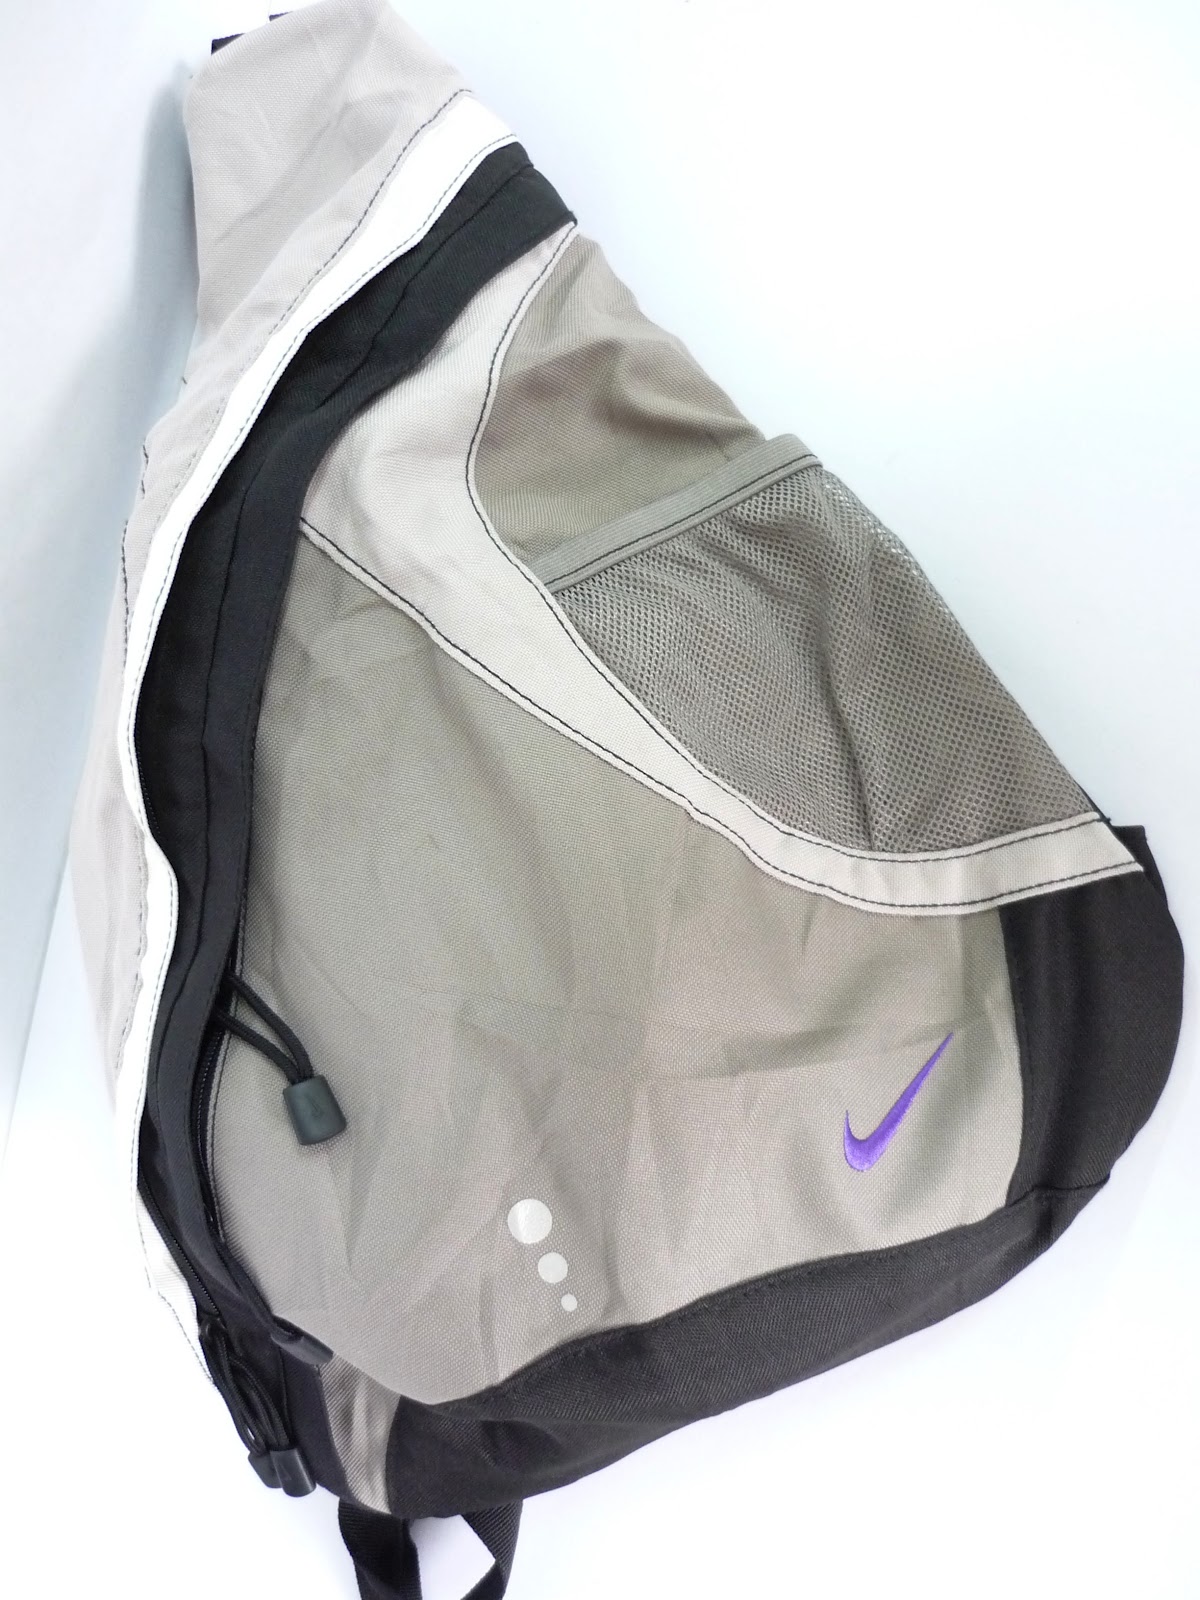 @RCHYbundle: NIKE sling single cross body bags and shoes large bags